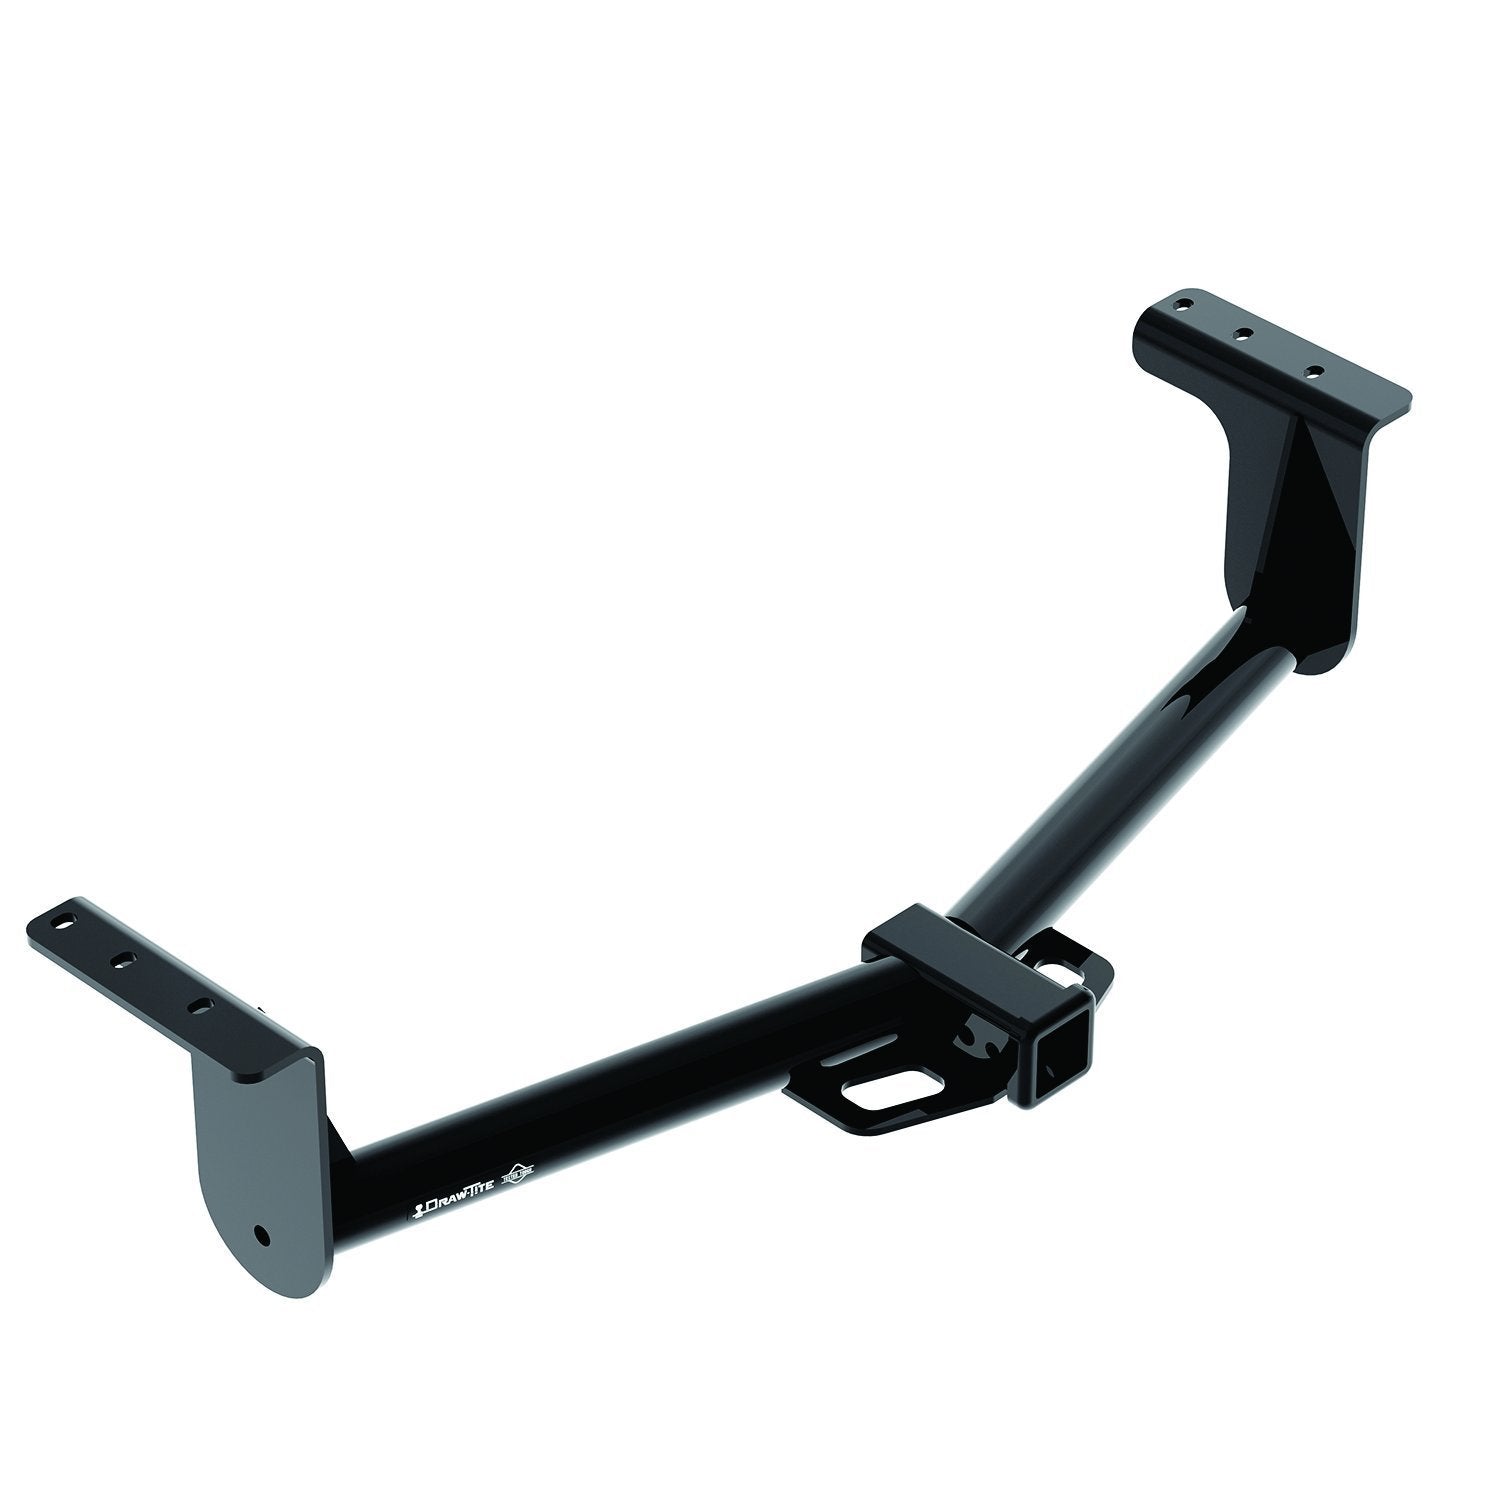 Draw-Tite Towing/Trailer Hitch 75790 (Frame Receiver) Class 3 for 2012-2021 Ford Ranger (Export Model)